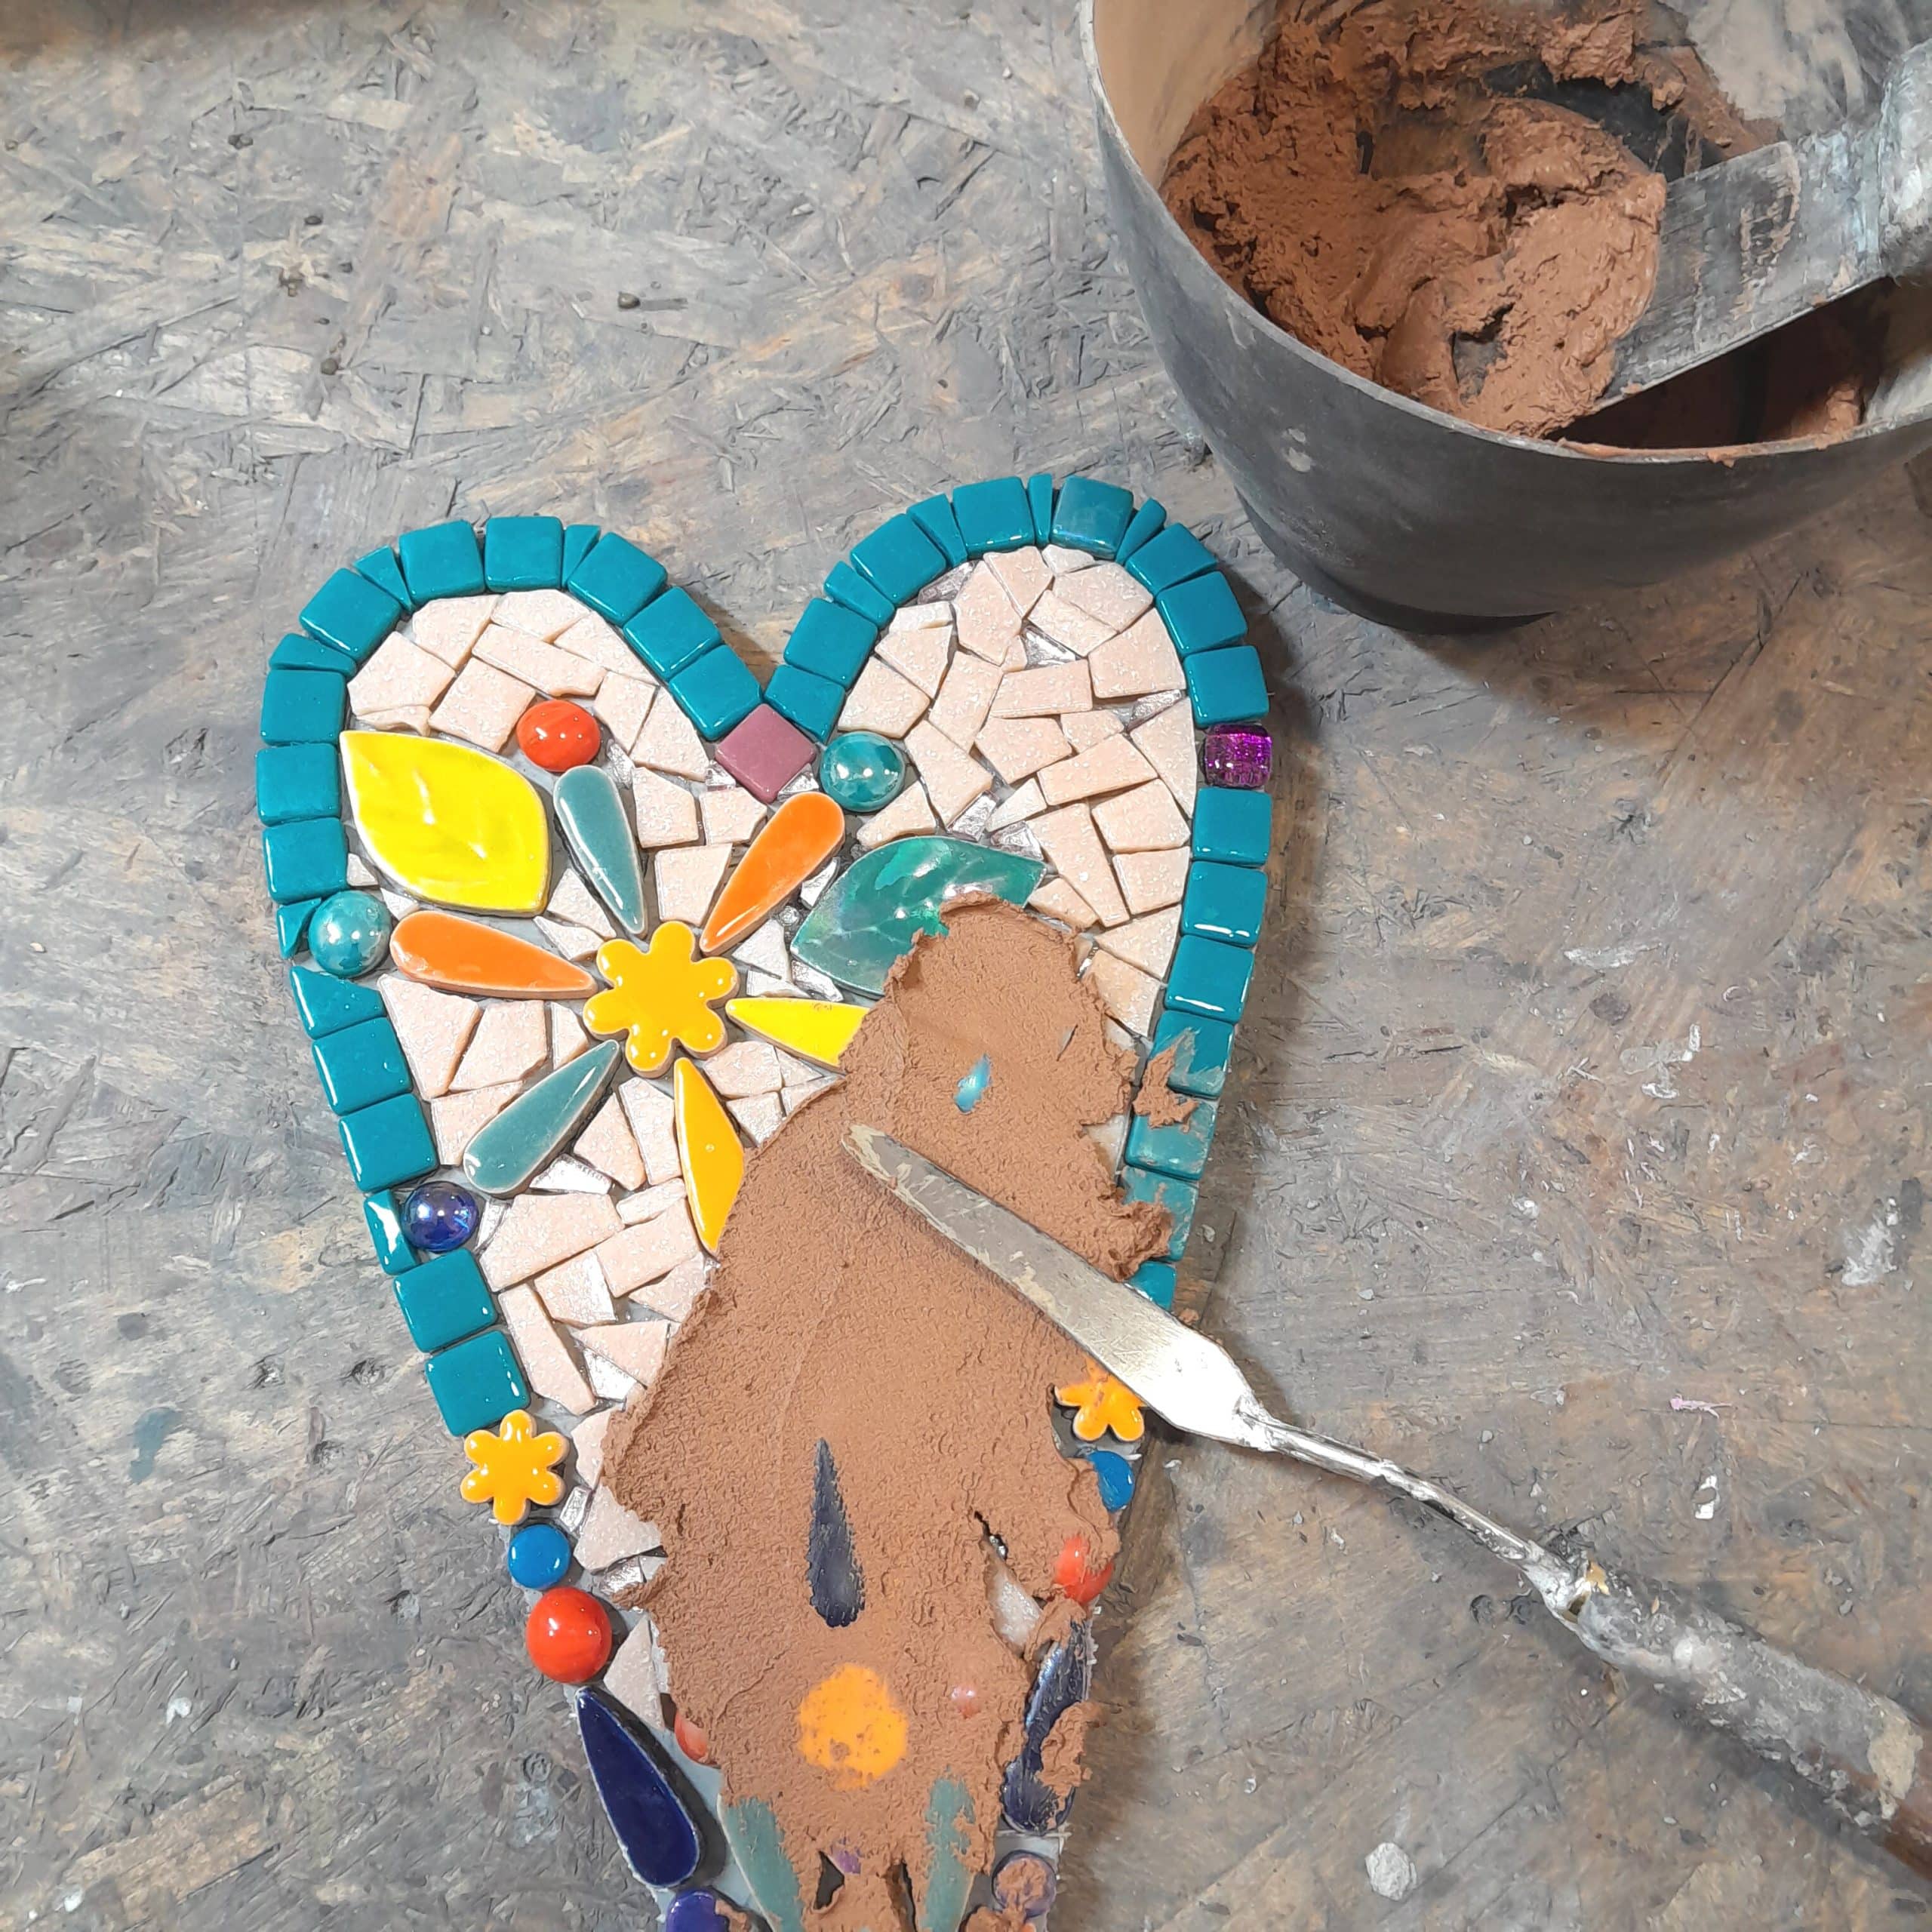 grouting a mosaic heart with Mapei caramel grout